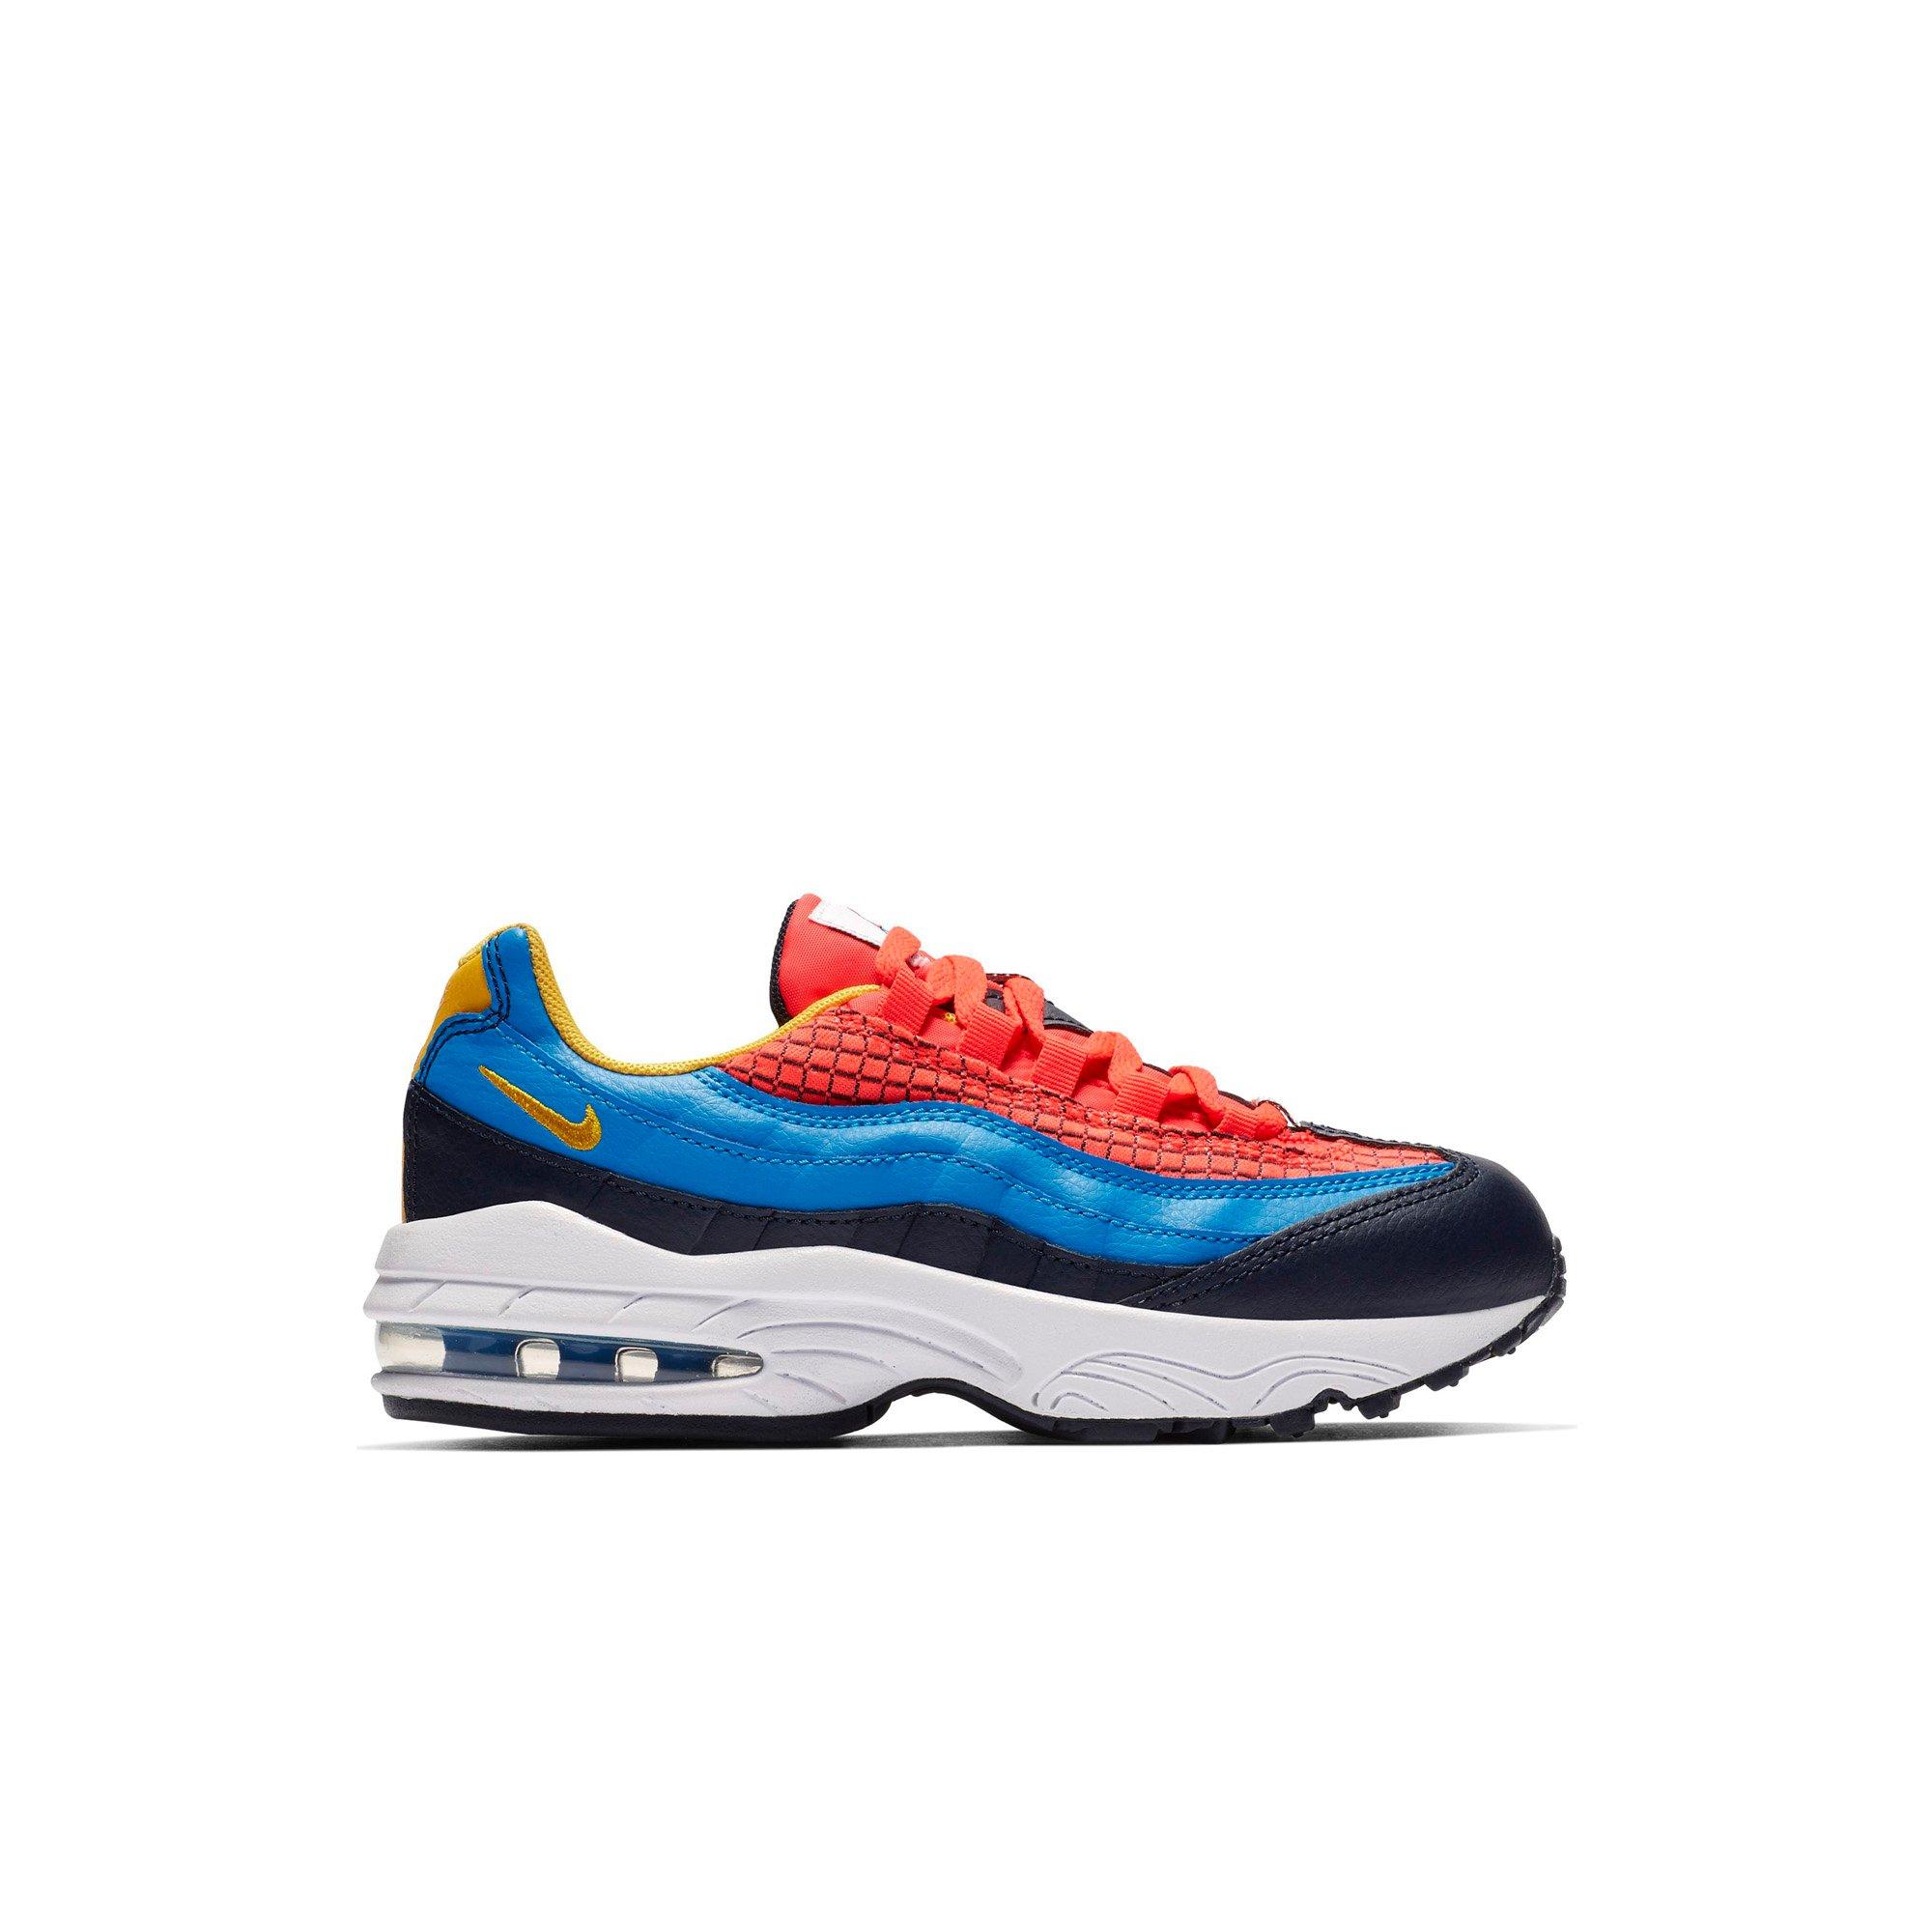 red yellow and blue air max